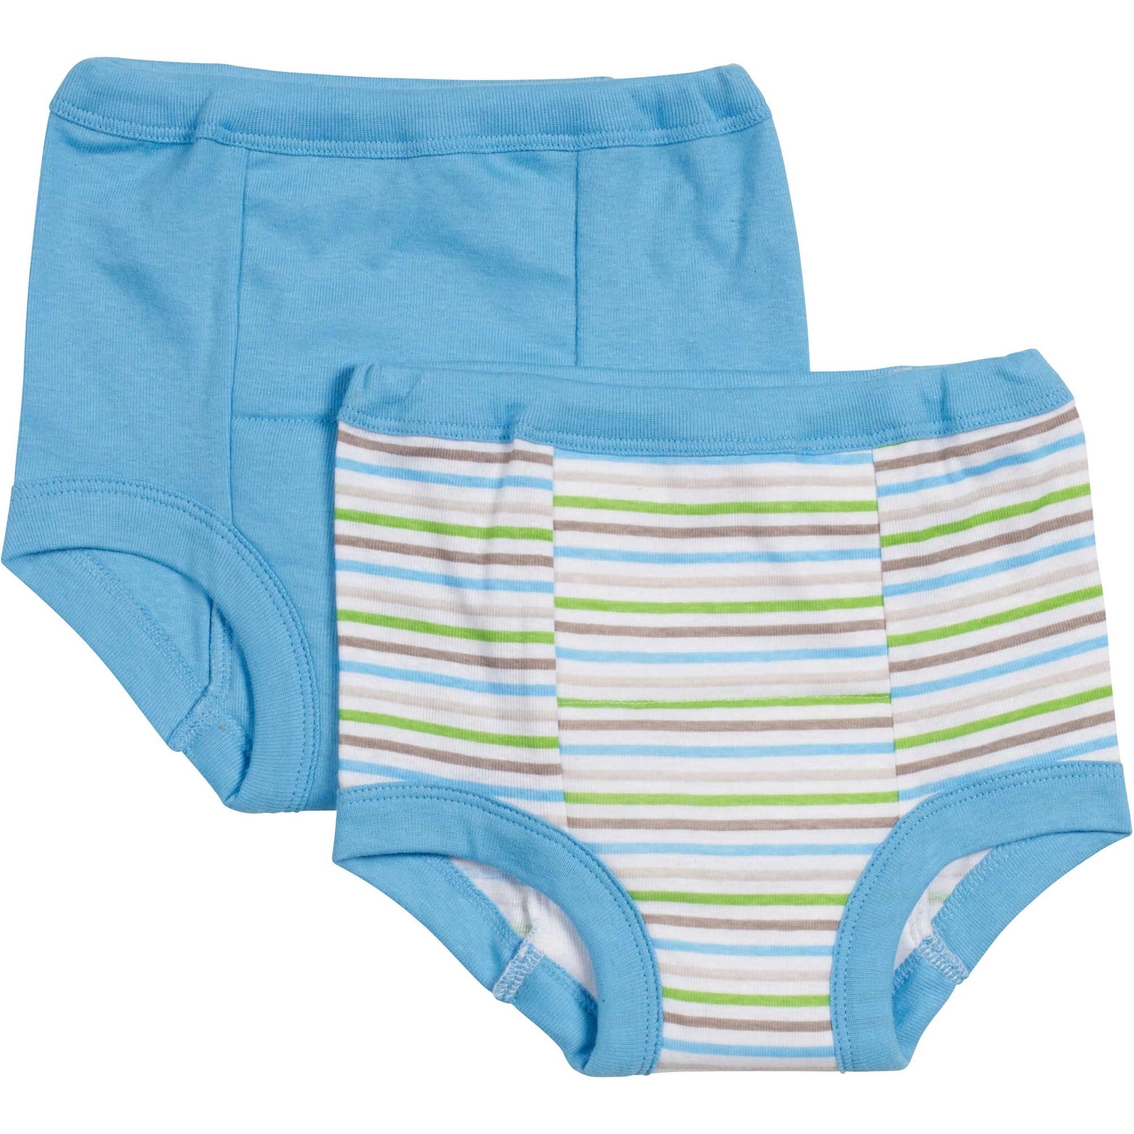 Gerber Infant And Toddler Boys Training Pants 2 Pk., Toddler Boys 2t-5t, Clothing & Accessories